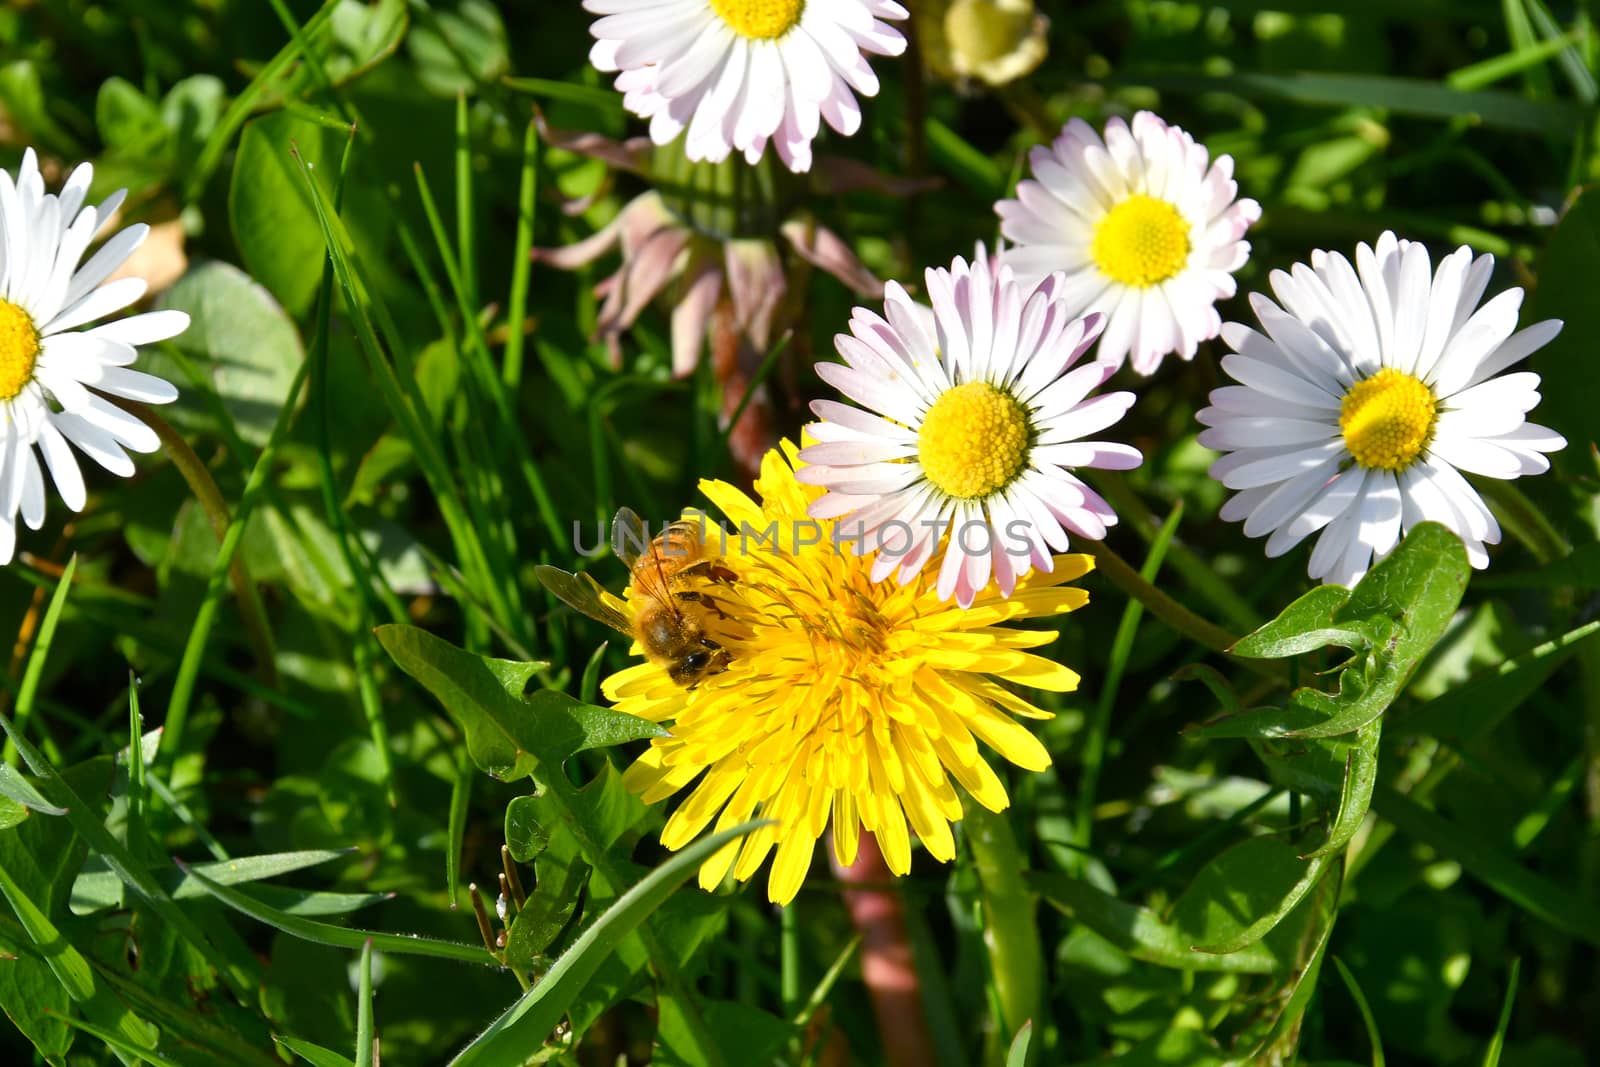 The bee on the dandelion flower by bongia